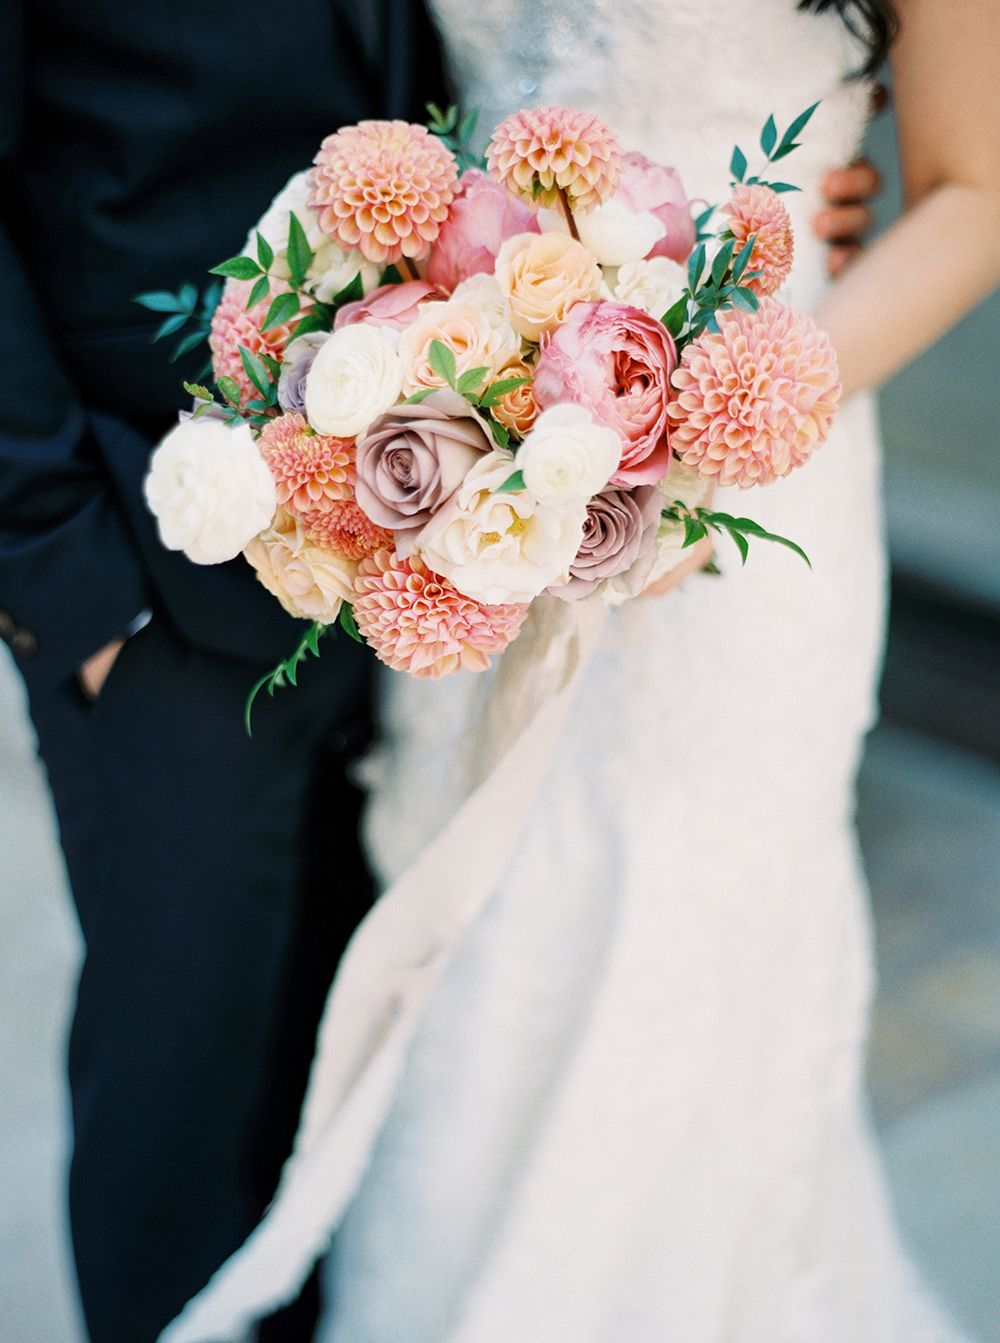 Christine and Mark's Blush and Taupe Outdoor Wedding